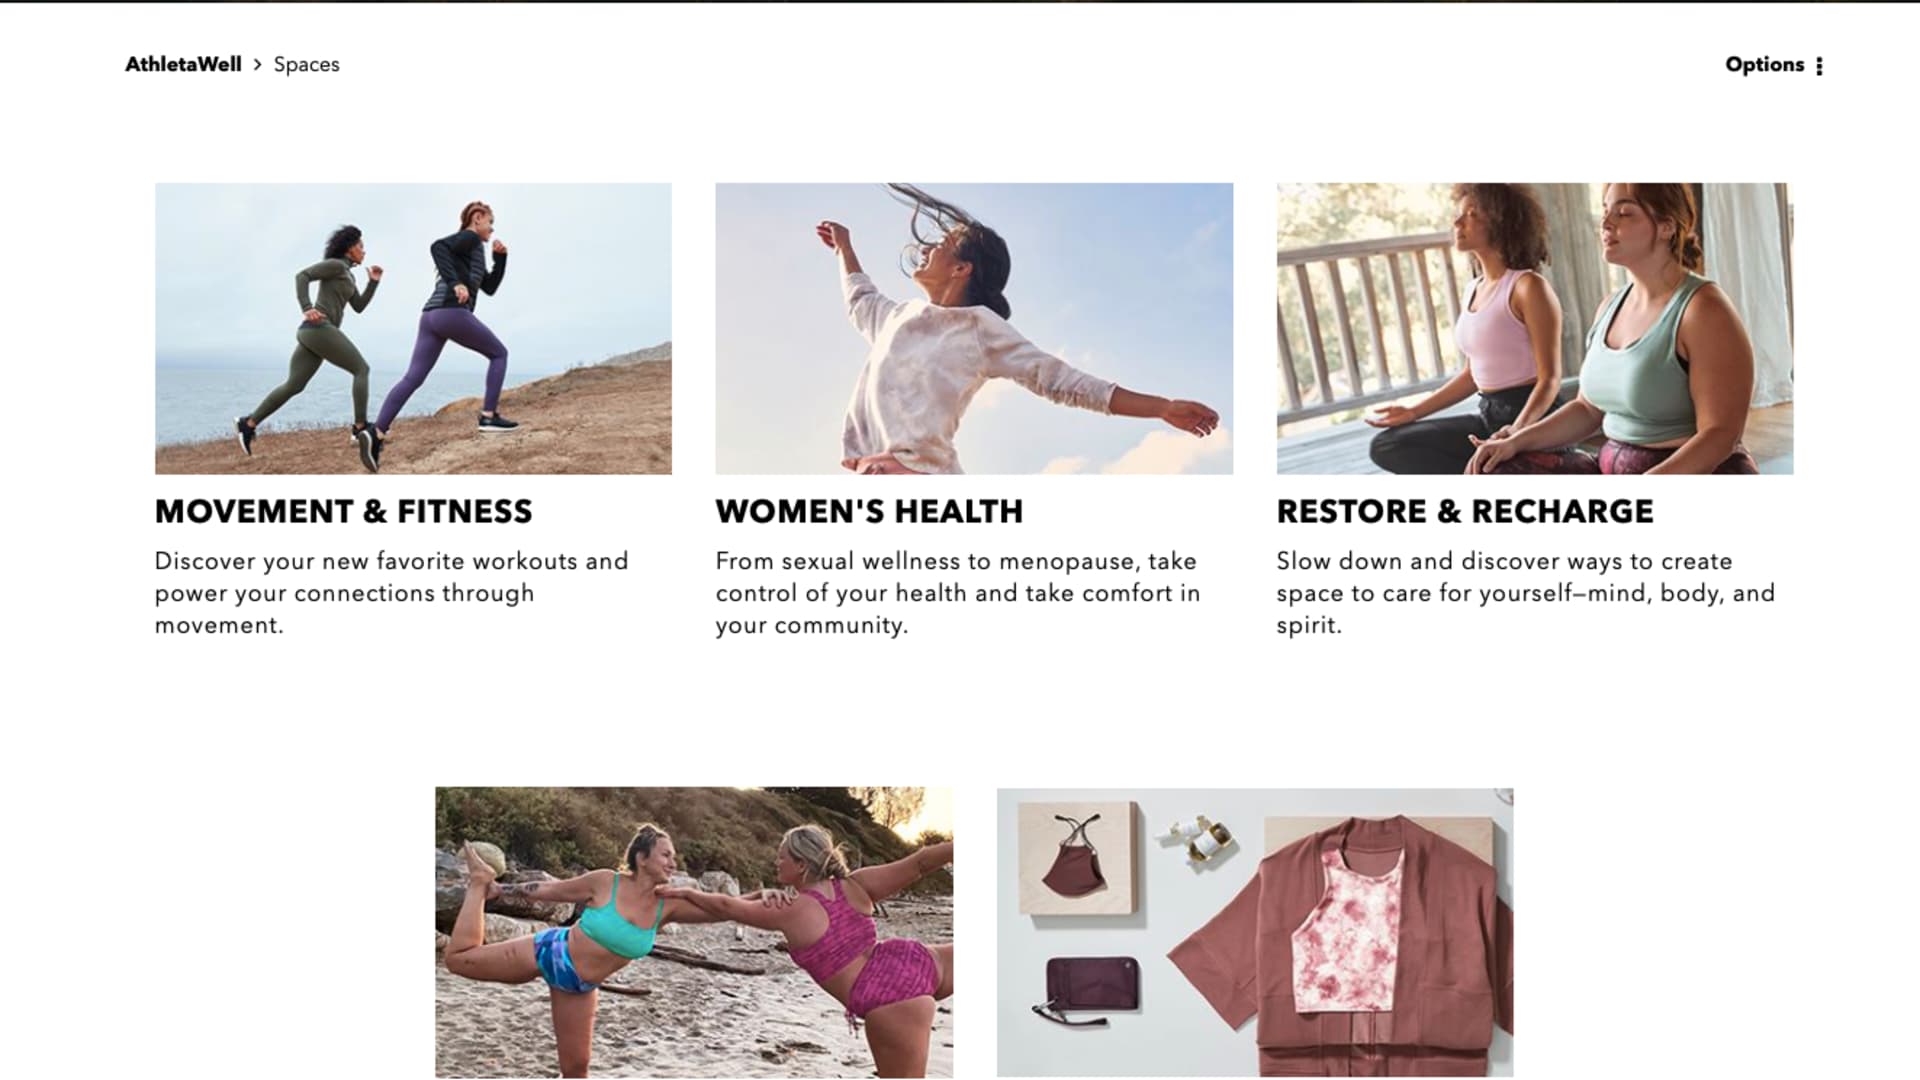 AthletaWell will become a benefit of Athleta's rewards program. It offers workout content and spaces to chat with other women on topics ranging from mental health to body positivity. 